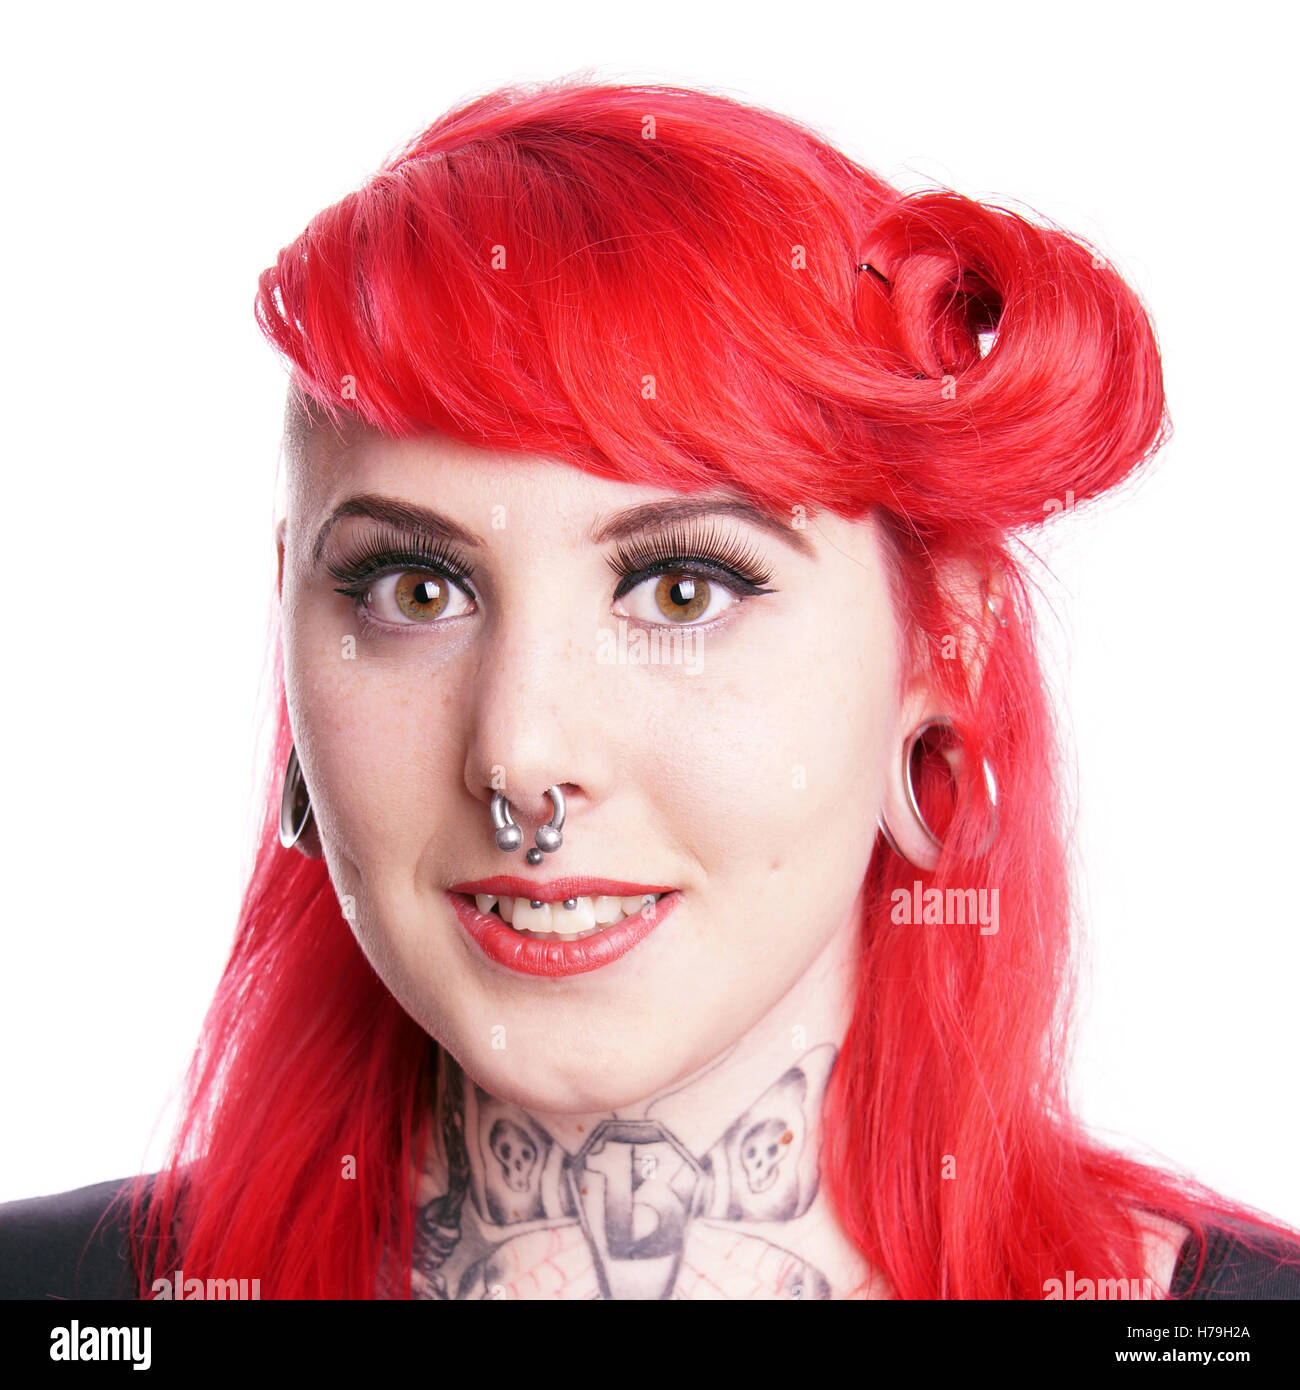 girl with piercings and tattoos Stock Photo